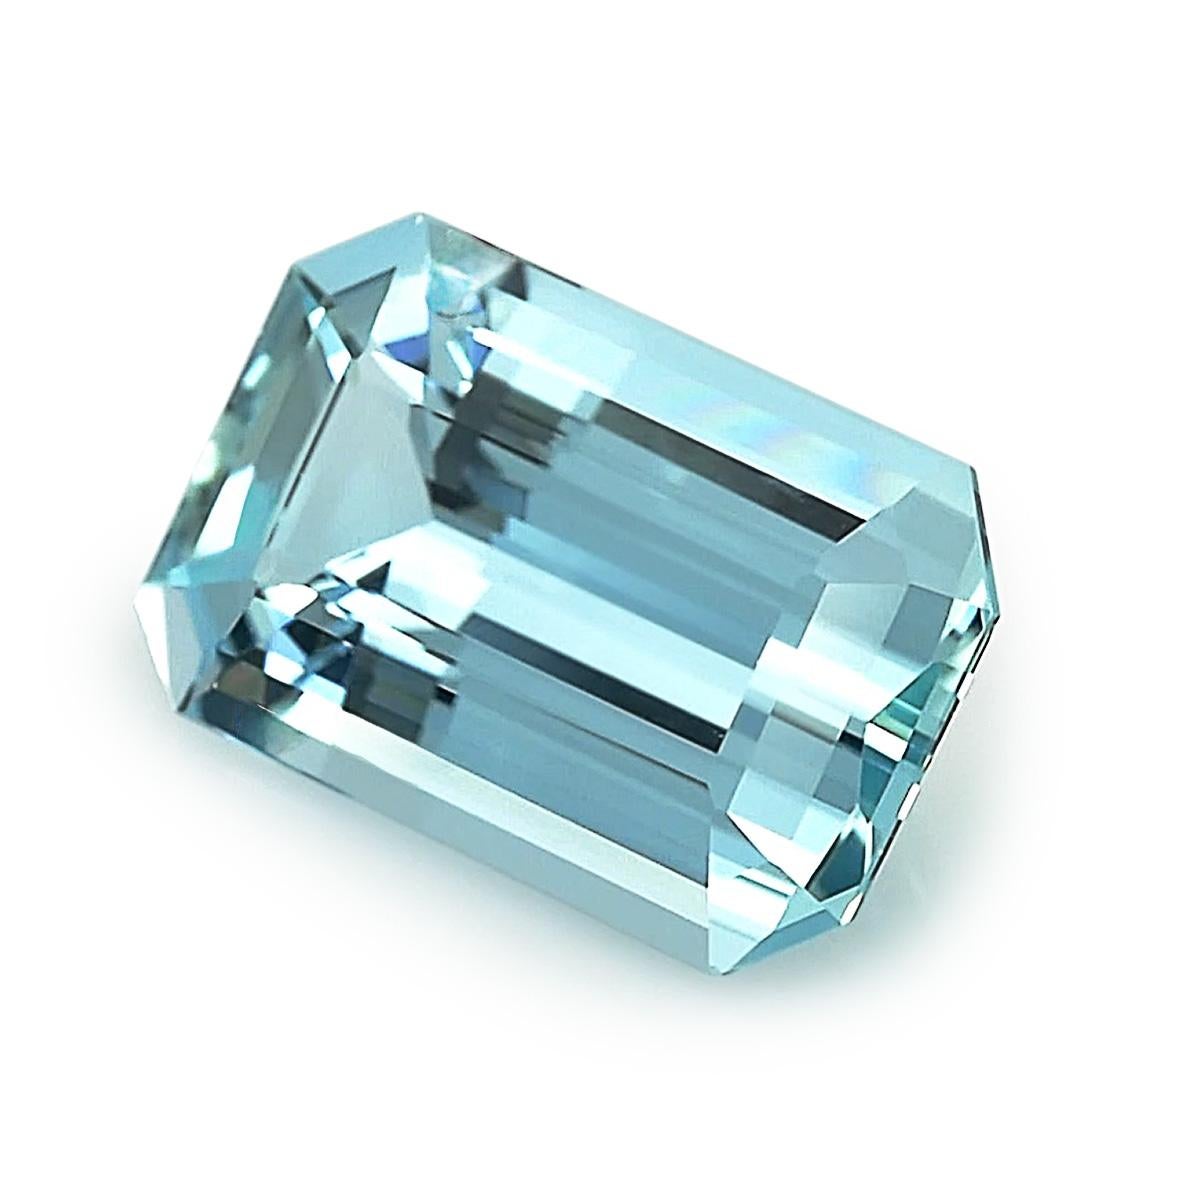 Identification: Natural Aquamarine 6.96 carats

Carat: 6.96 carats
Shape: Emerald cut 
Measurements: 15.65 x 9.90 x 6.52 mm
Cut: Brilliant/Step
Color: Light Blue 
Clarity: very eye clean

Introducing a captivating Natural Pink Sapphire, weighing